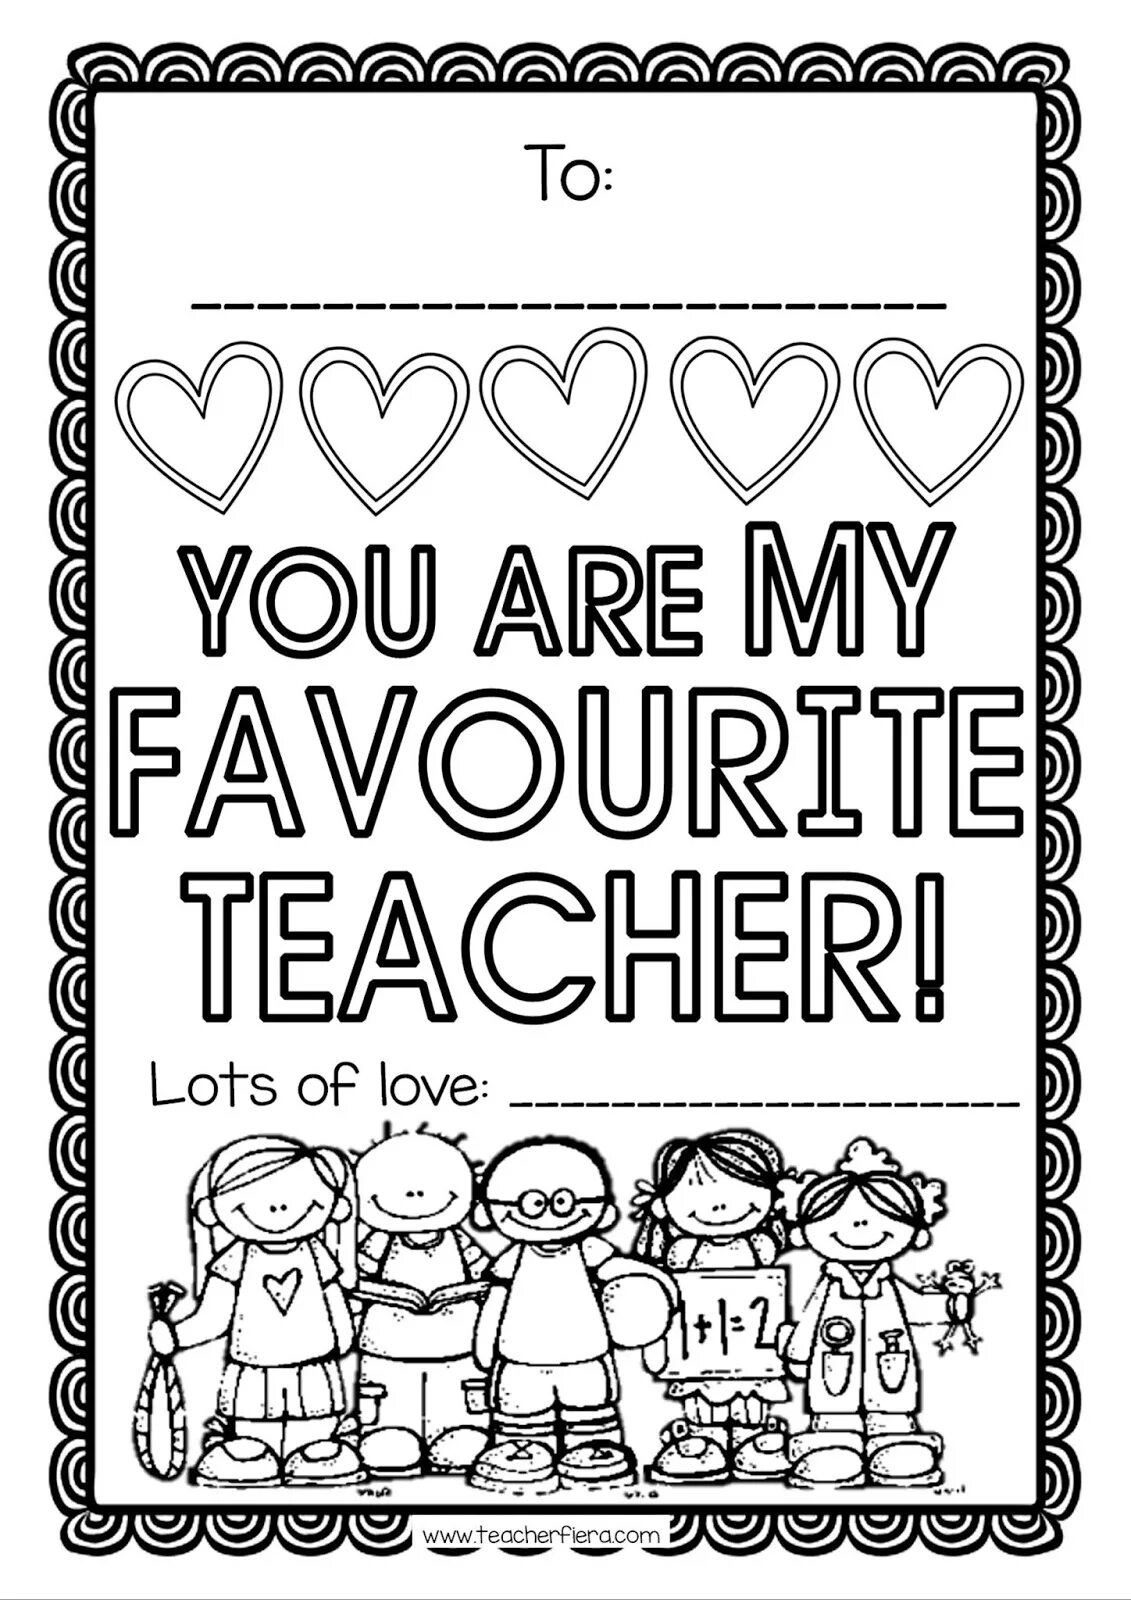 My favourite teacher Worksheets. My favorite teacher. About my favourite teacher. My favourite teacher is.